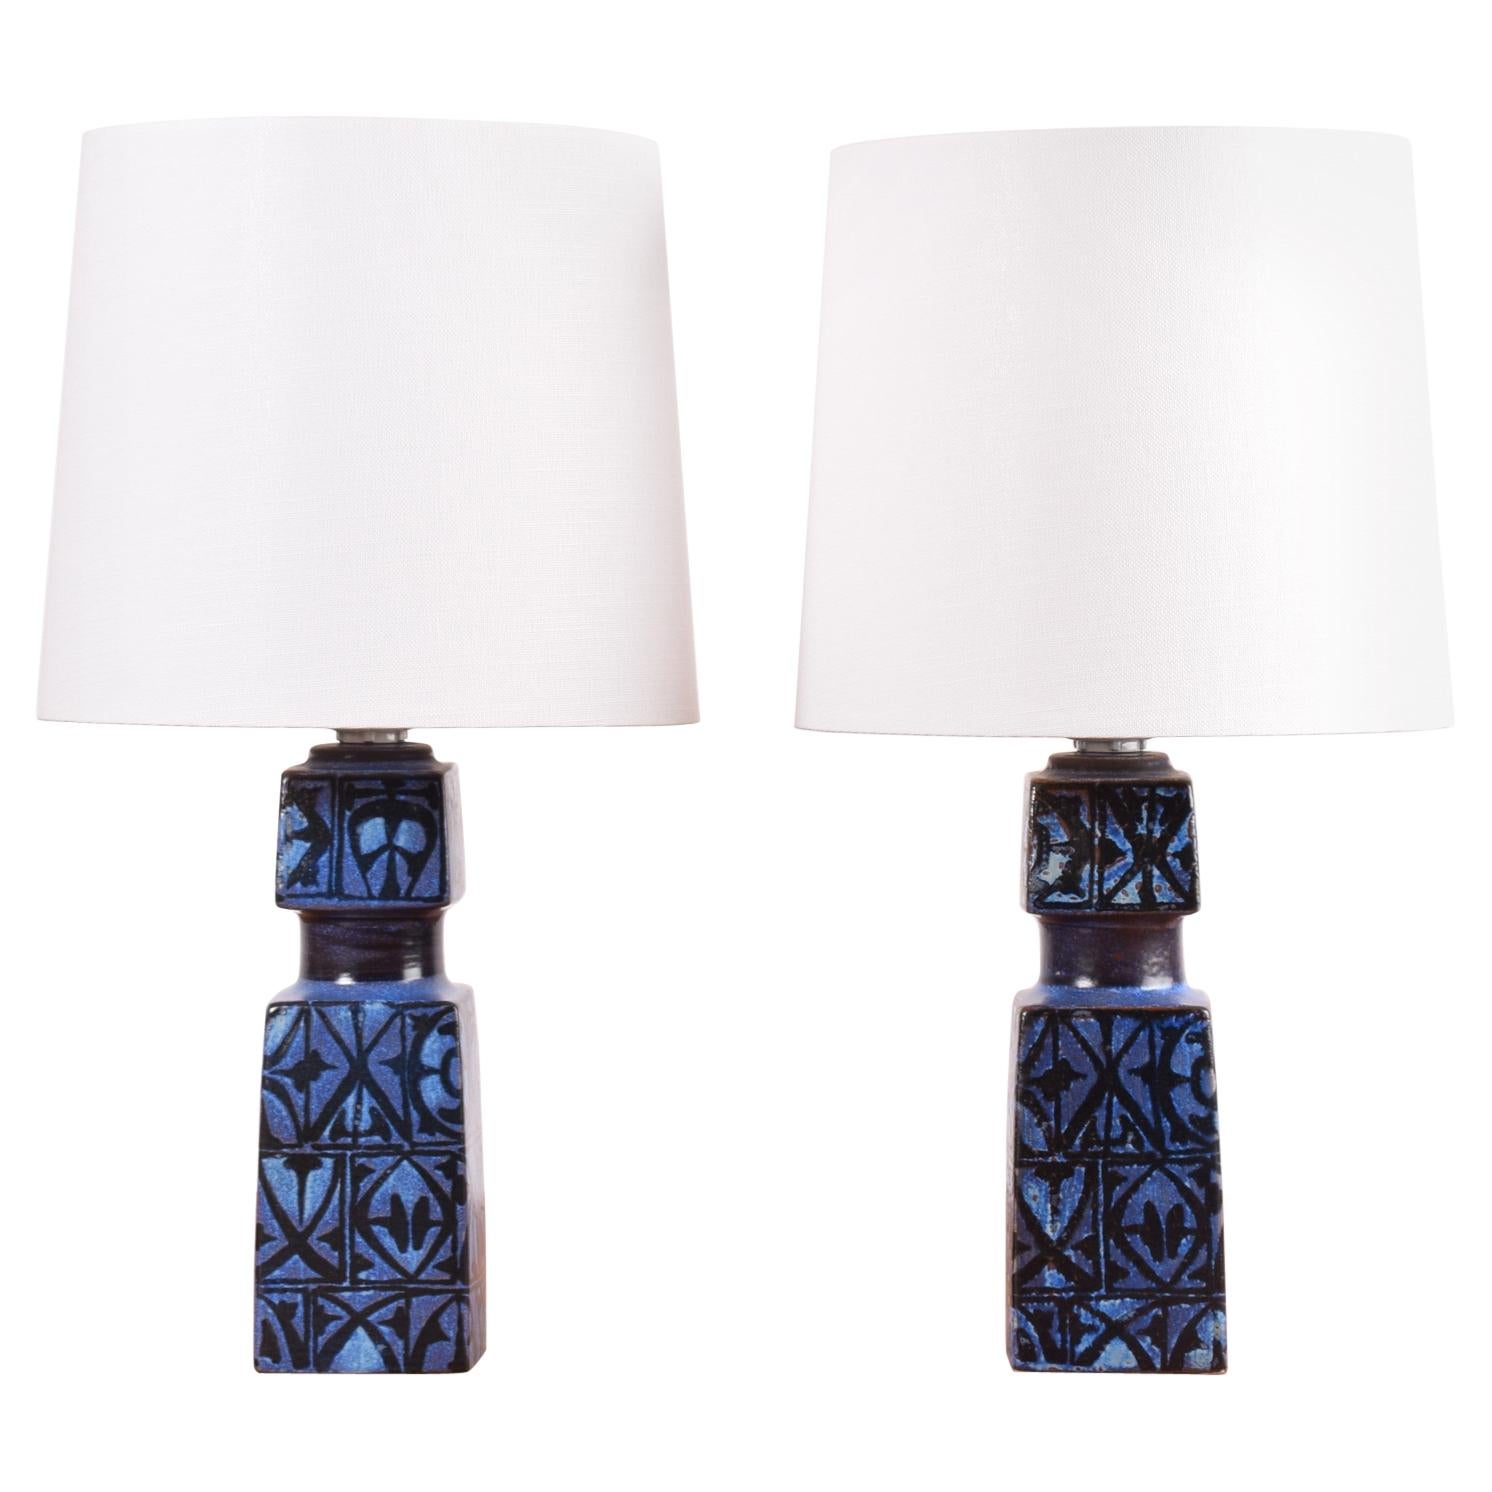 Pair of Royal Copenhagen Blue Table Lamps by Nils Thorsson, Danish Modern, 1970s